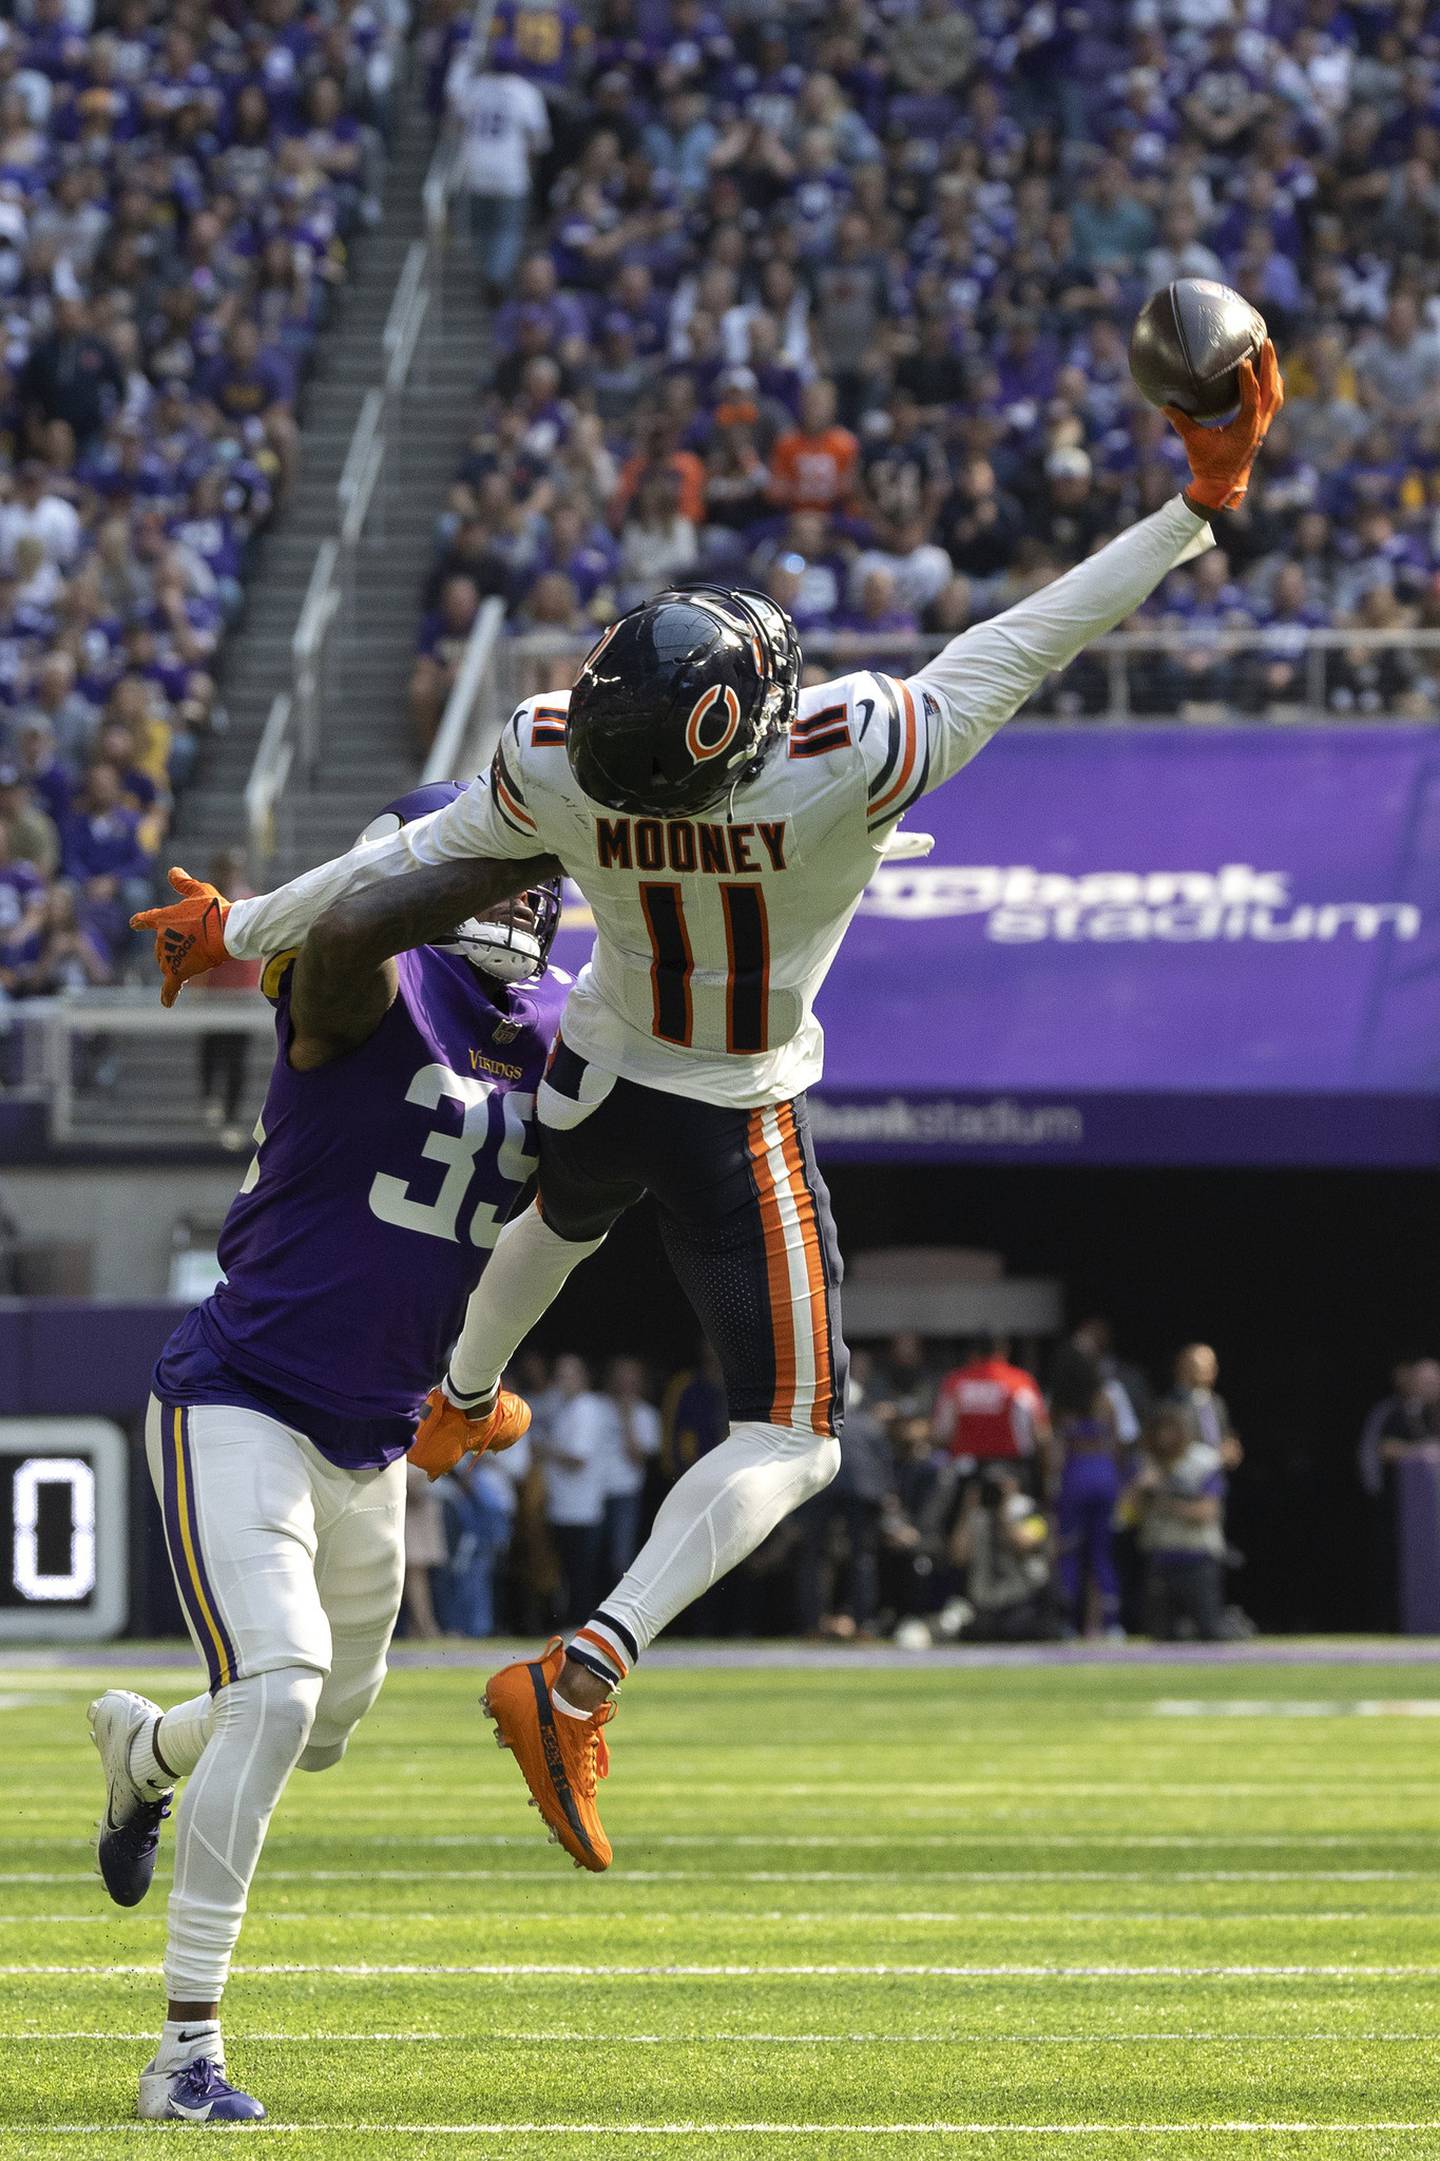 Bears wide receiver Darnell Mooney makes a one-handed catch away from Vikings cornerback Chandon Sullivan during the second quarter on Oct. 9, 2022.